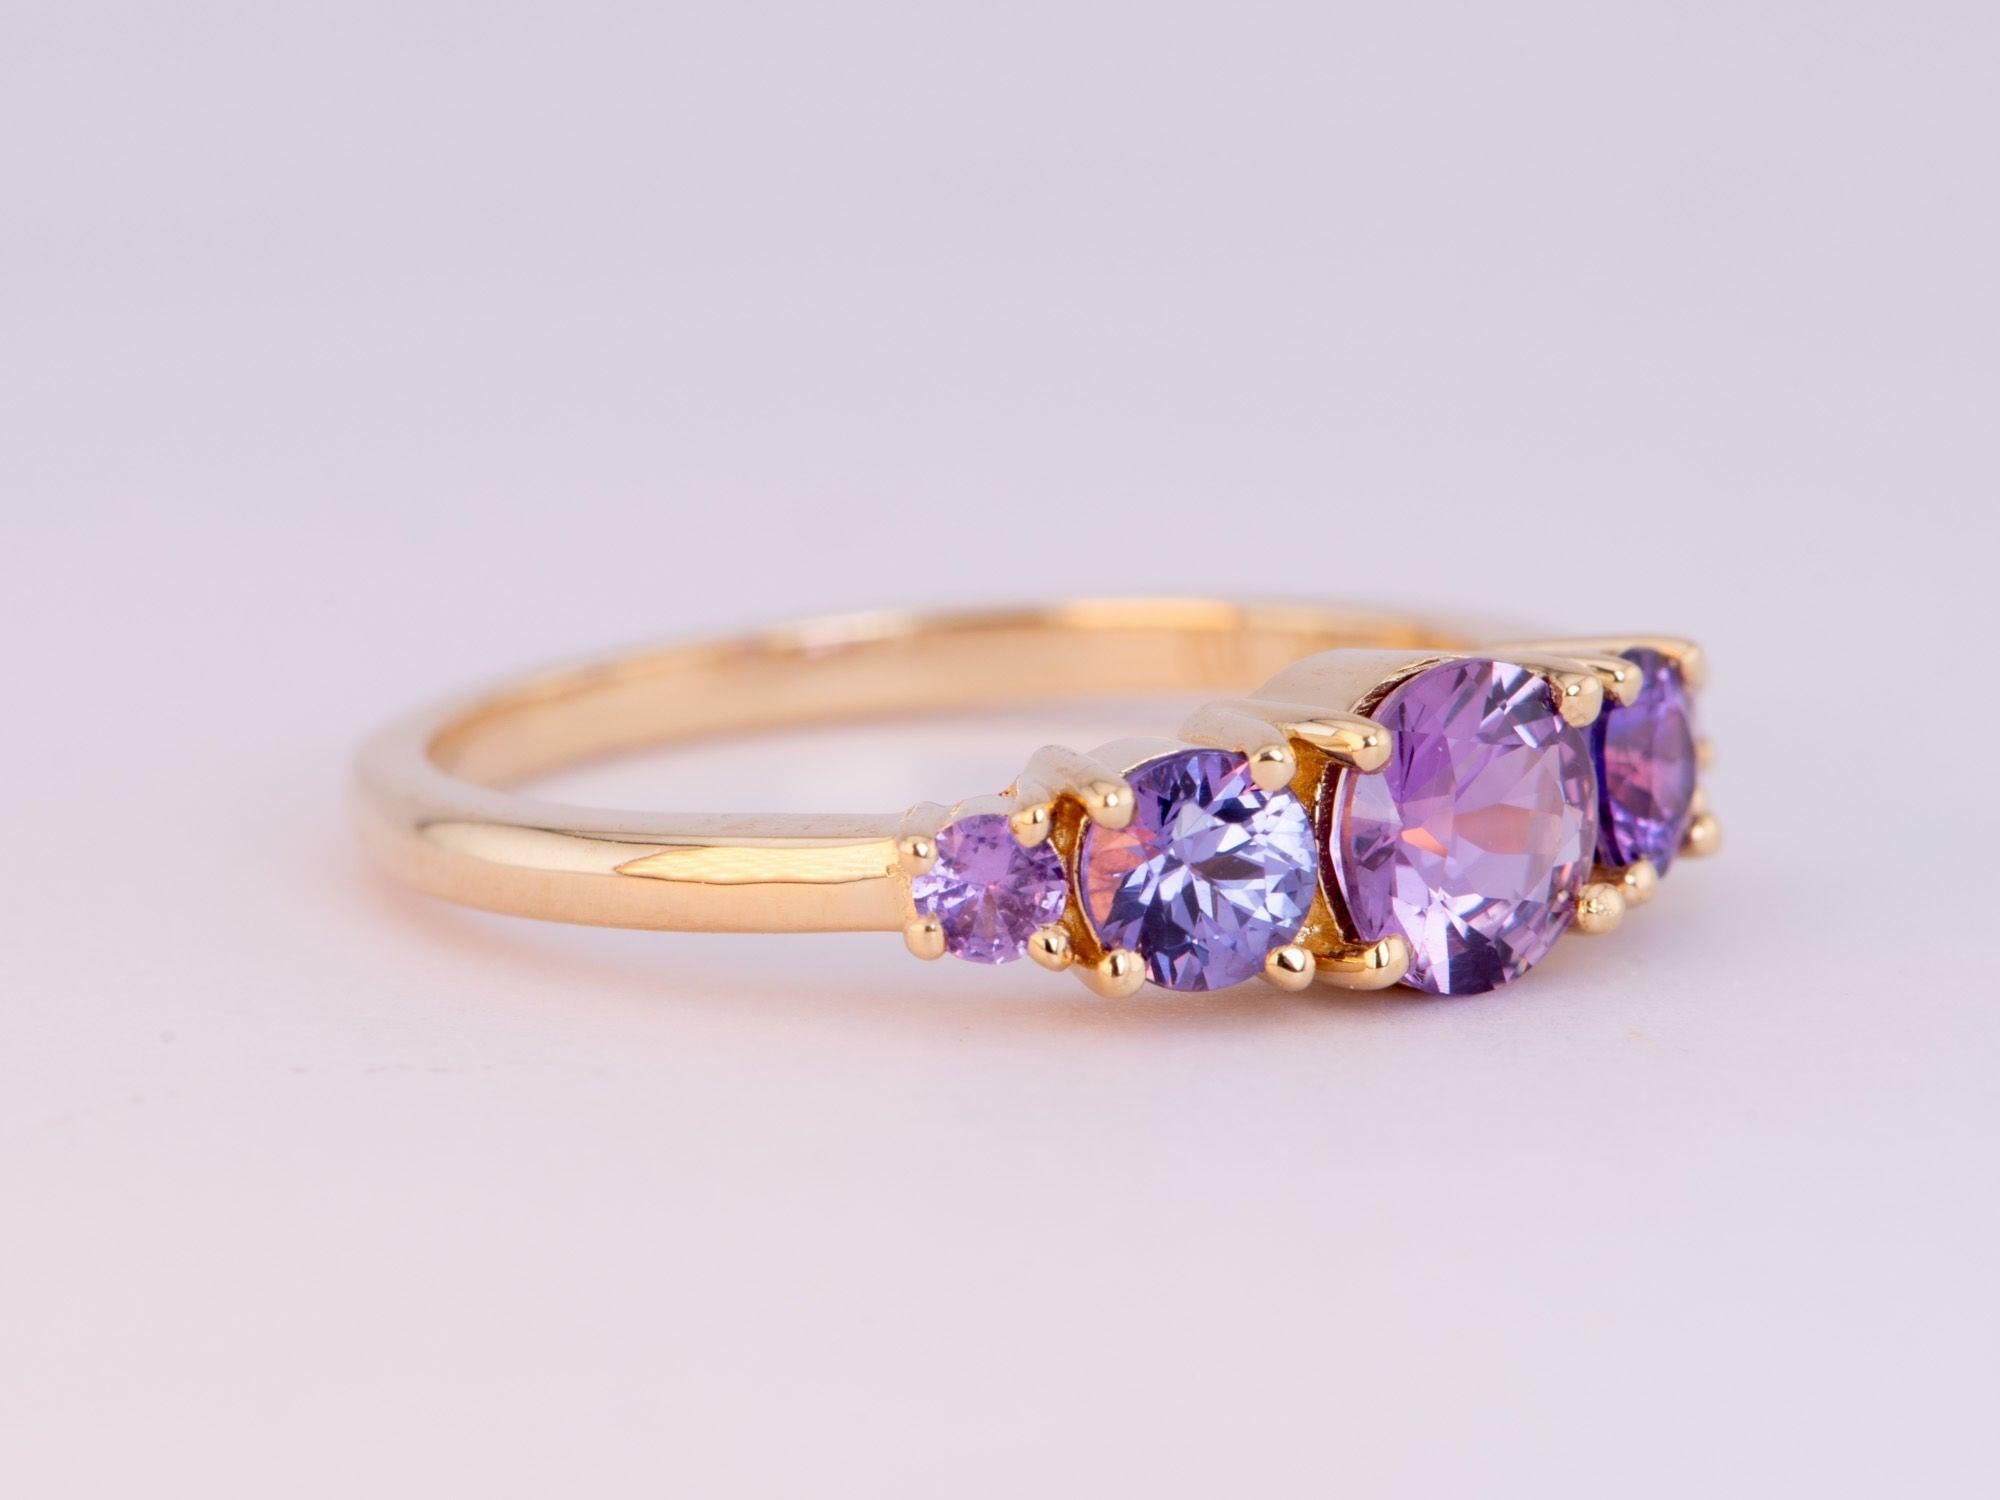 ♥ Mixed Sapphire 5-Stone Band 14K Gold
♥ The item measures 5.2mm in length, 17mm in width, and 4.2mm in height.
♥ Material: 14K Gold
♥ Gemstone: Sapphire, 1.37ct total 
♥ You are buying option A from the pictures, US size 7 (Free resizing up or down